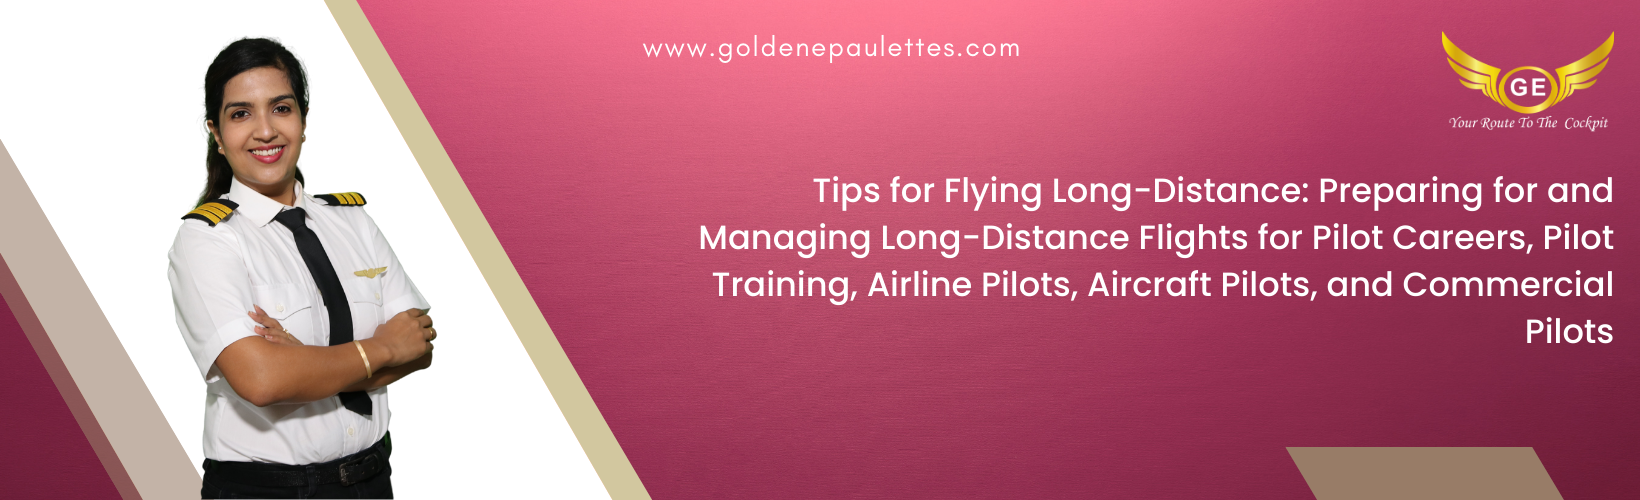 Tips for Flying Long Distance